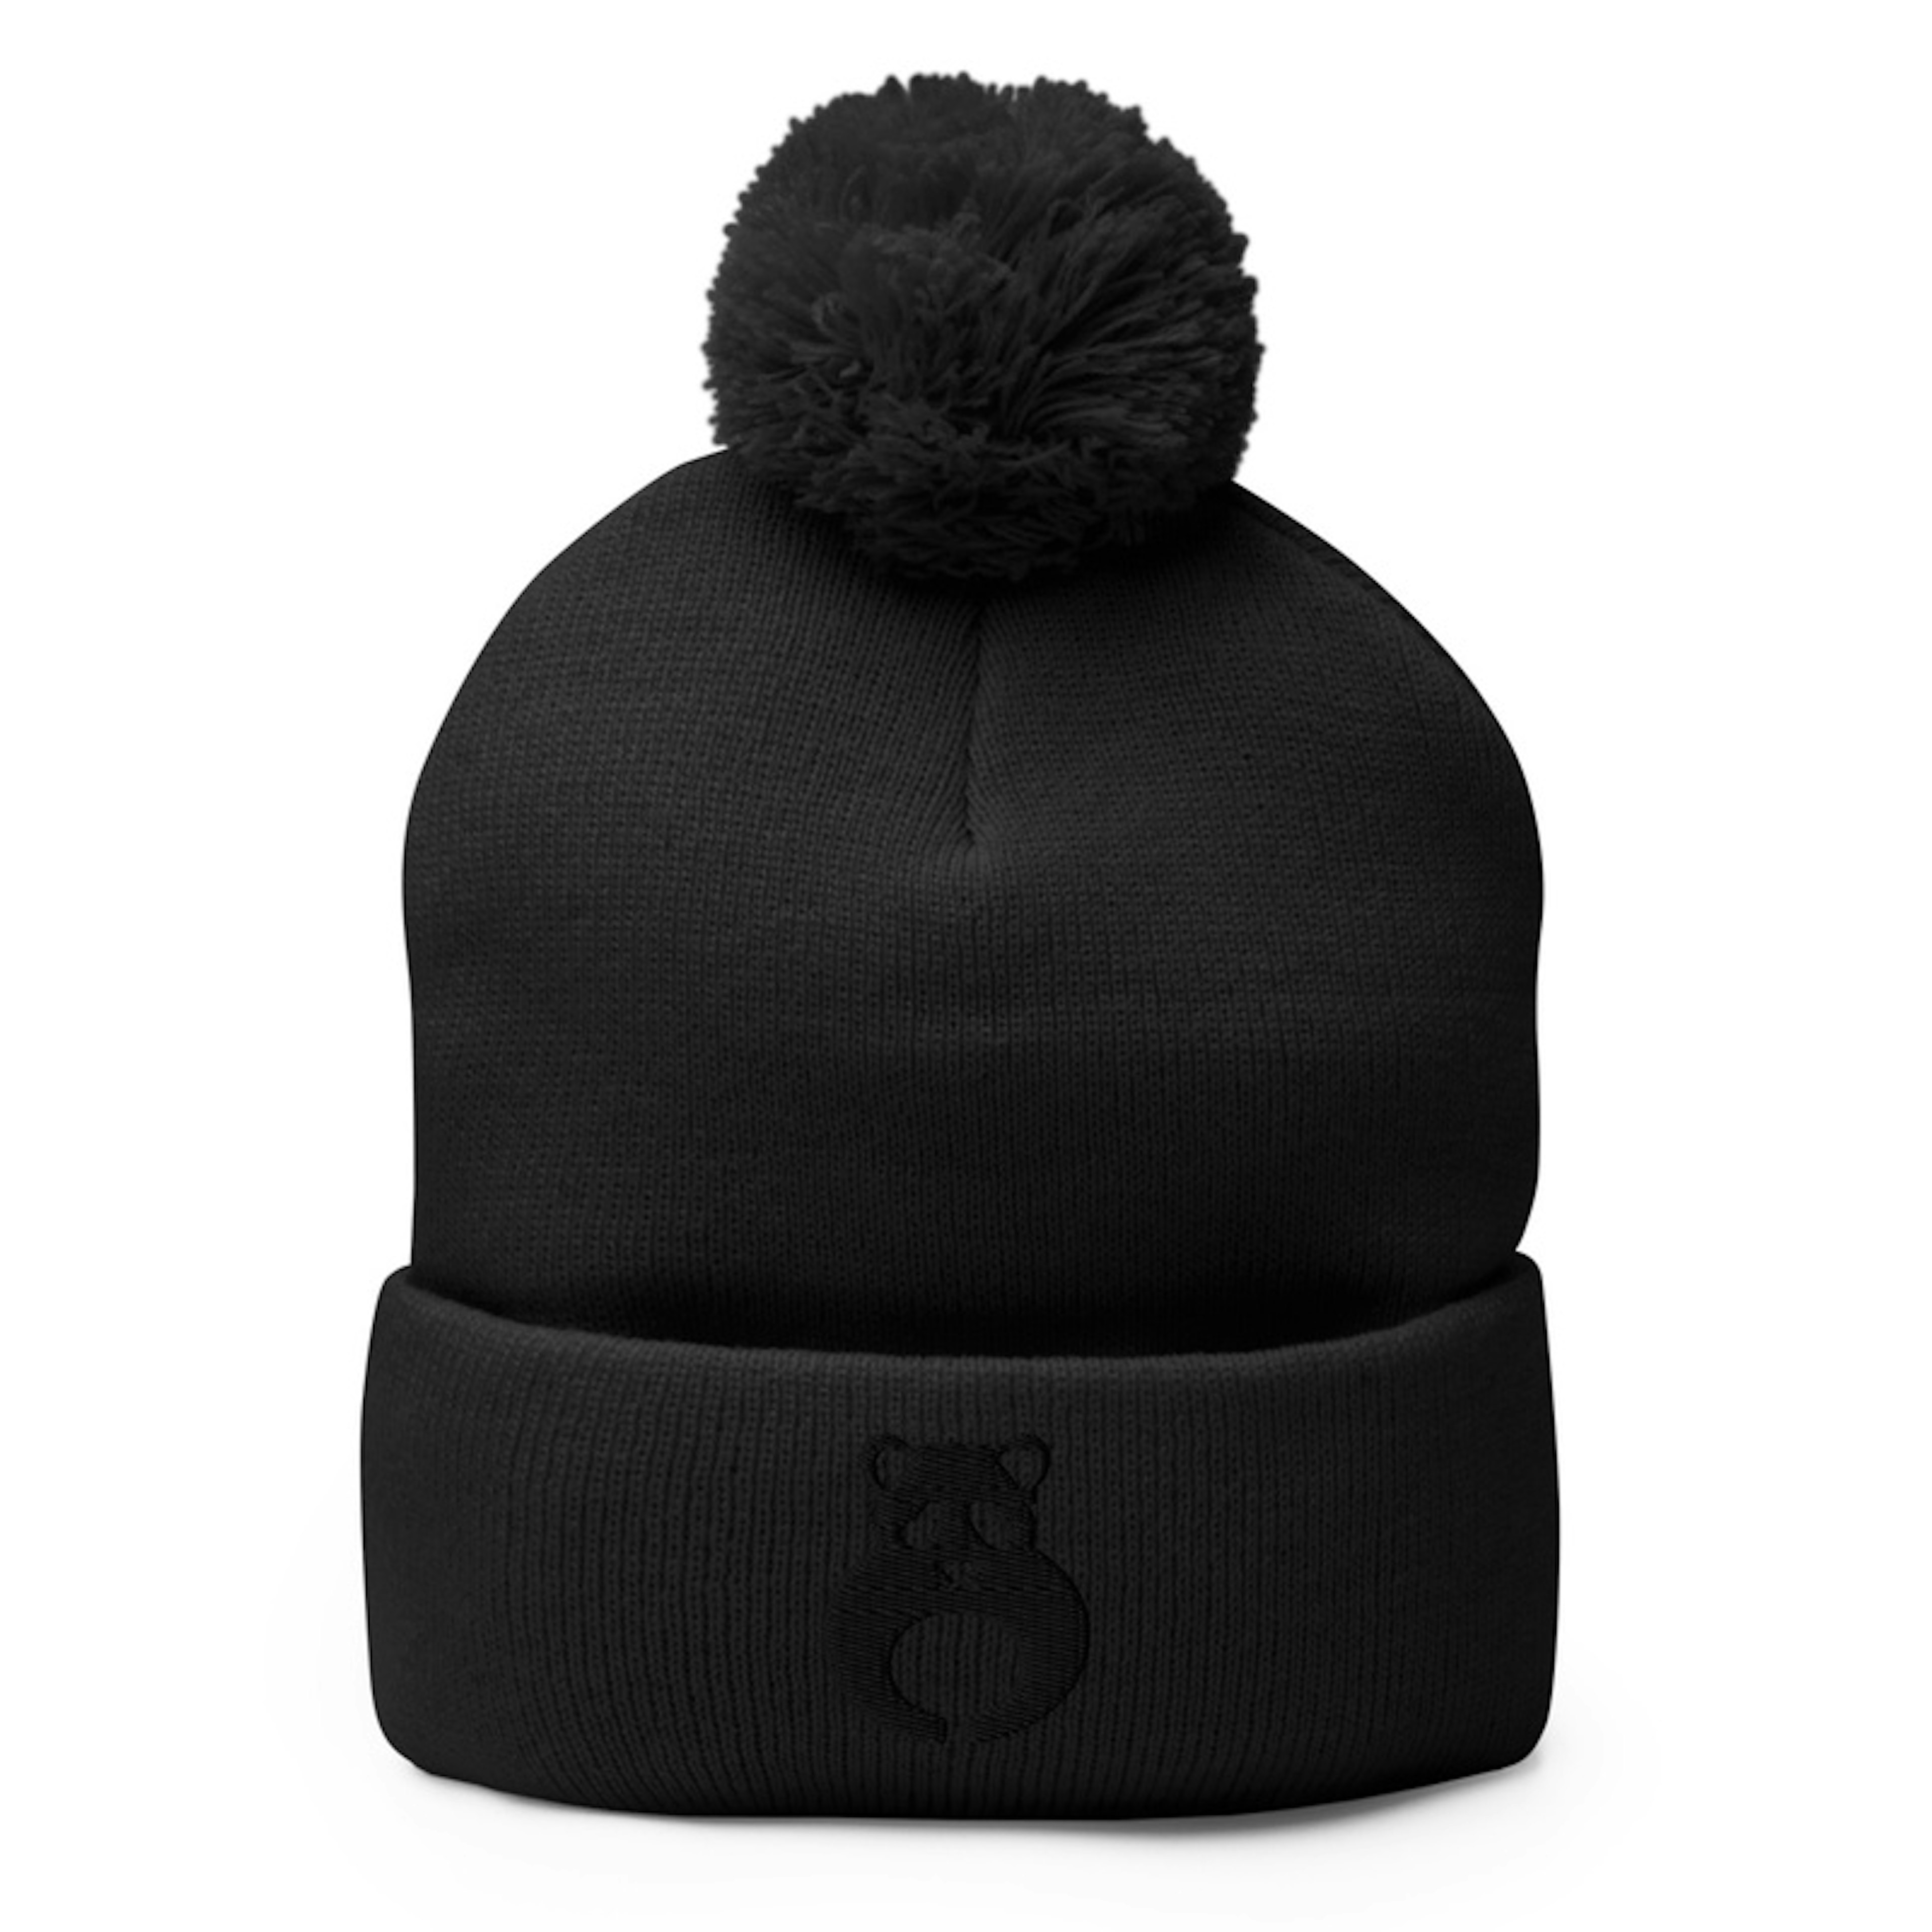 Bear Couture Skully 